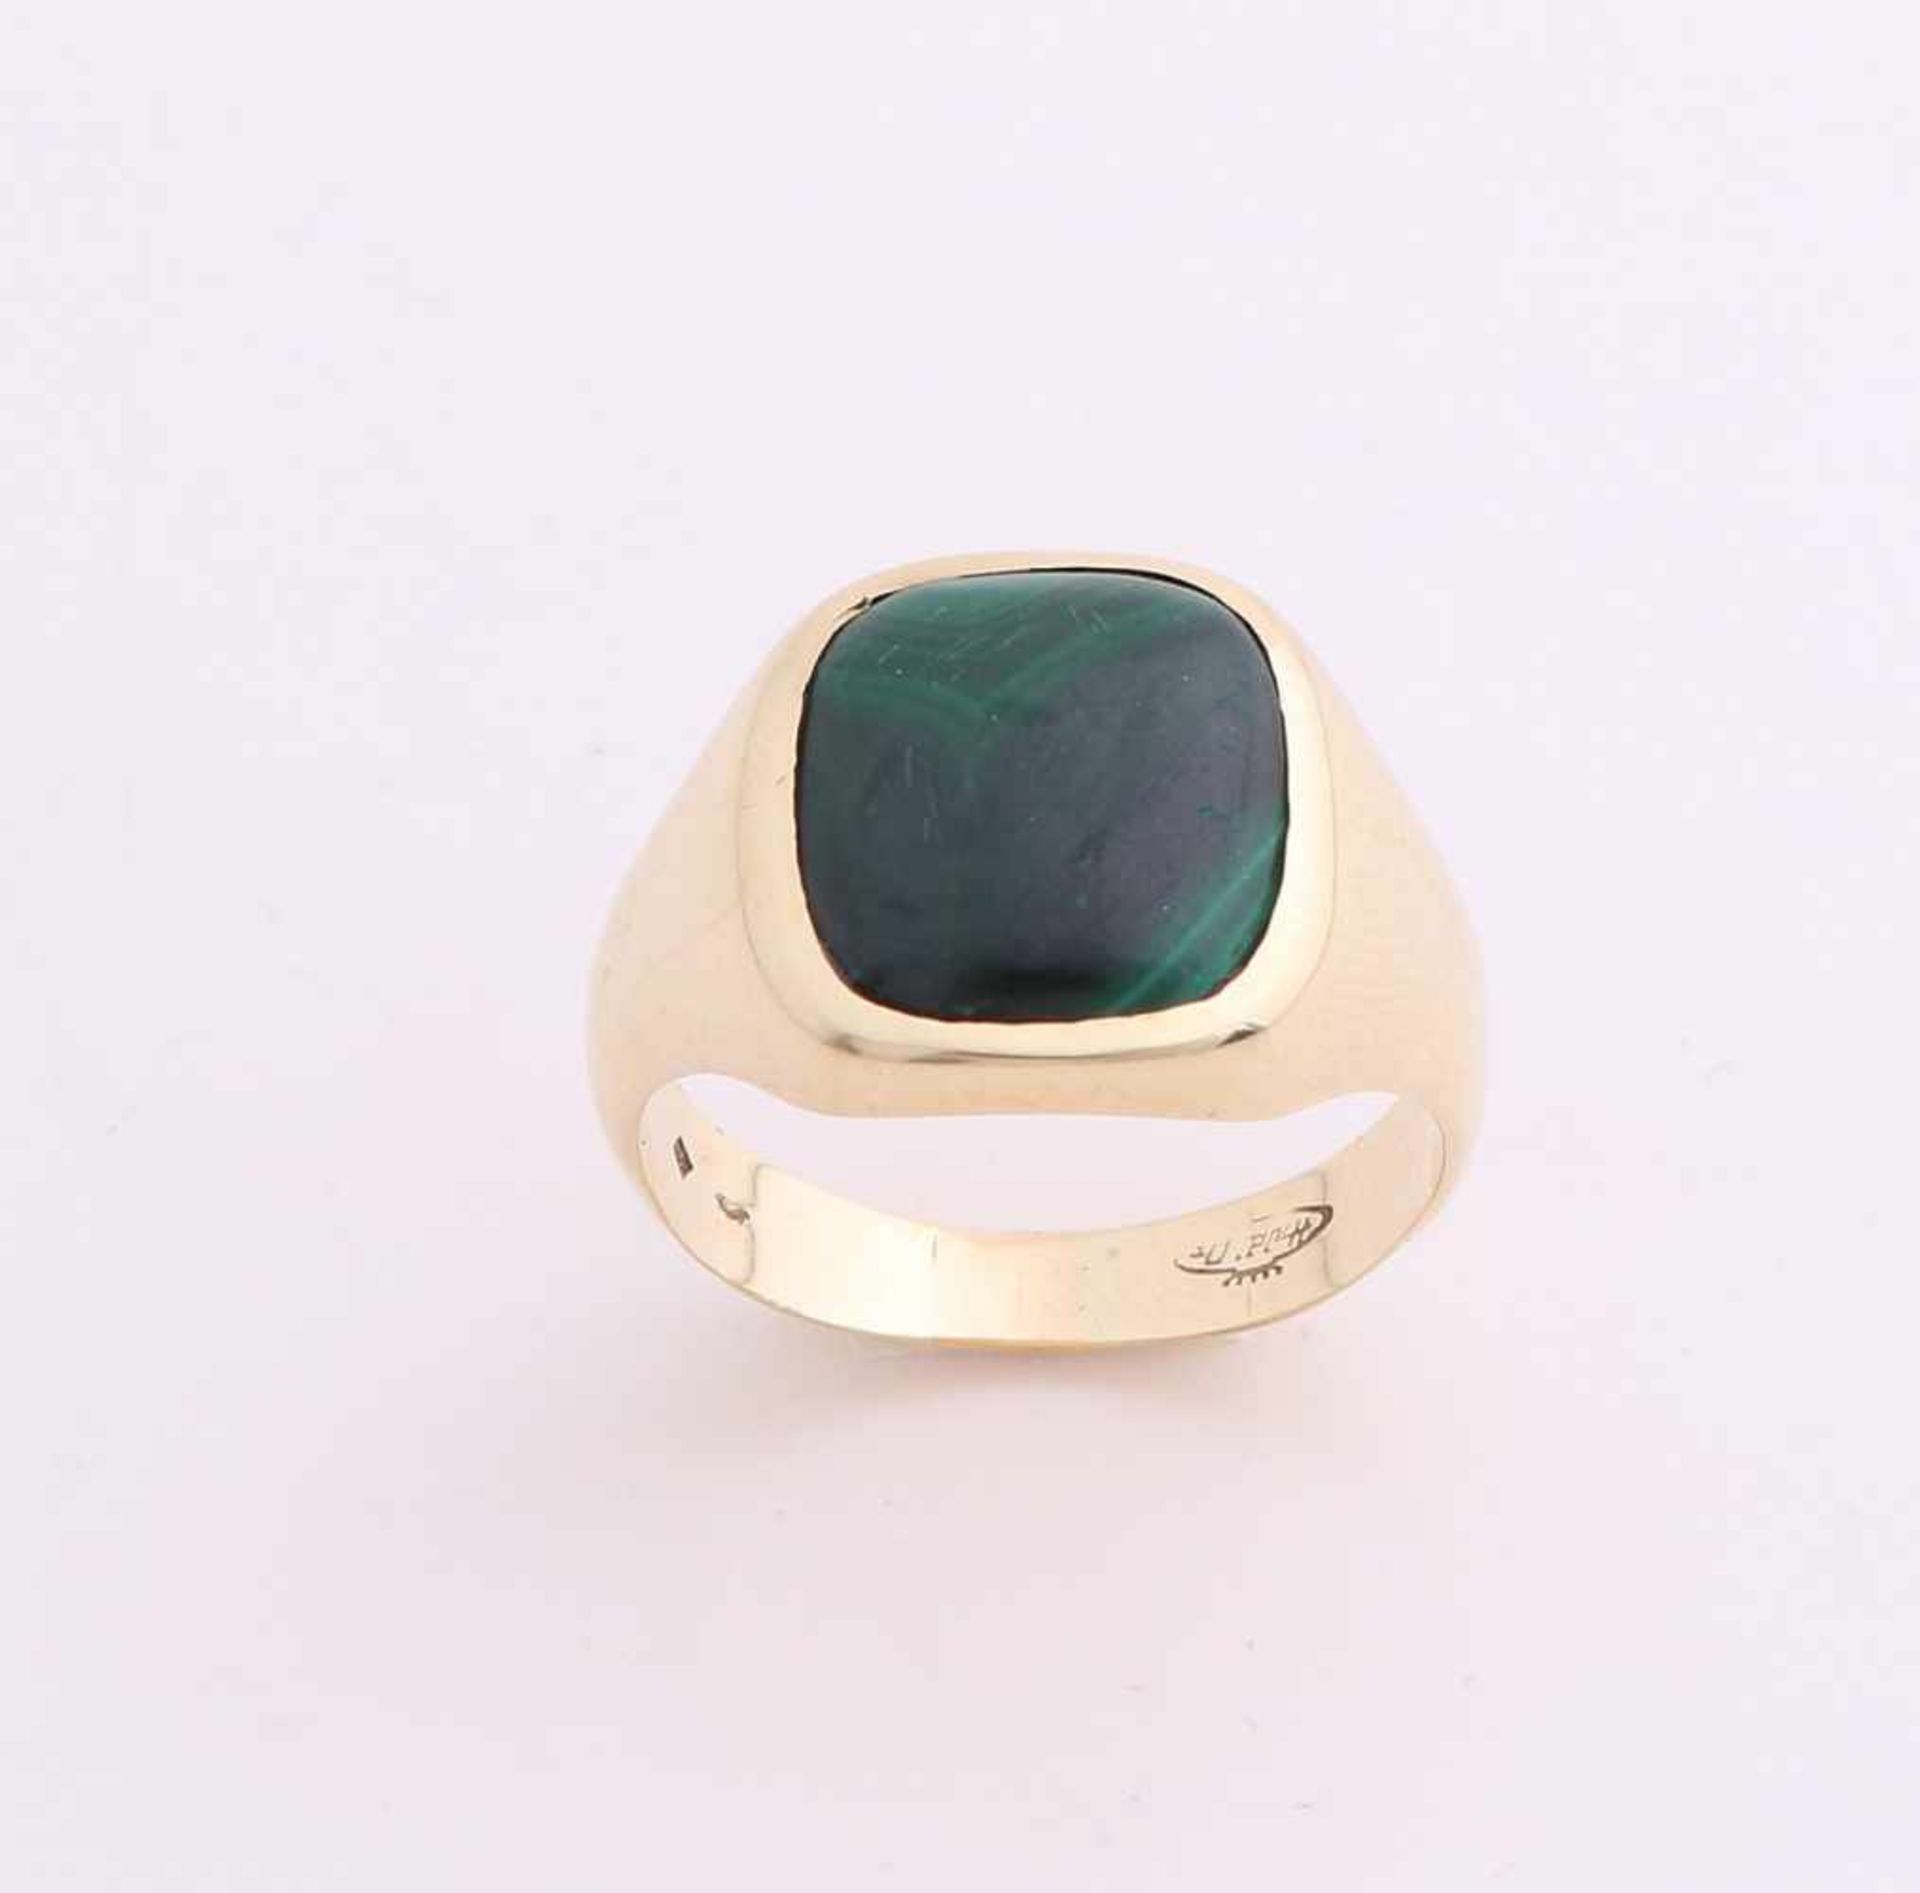 Yellow gold signet ring, 585/000, with malachite. Ring having a rectangular head set with a